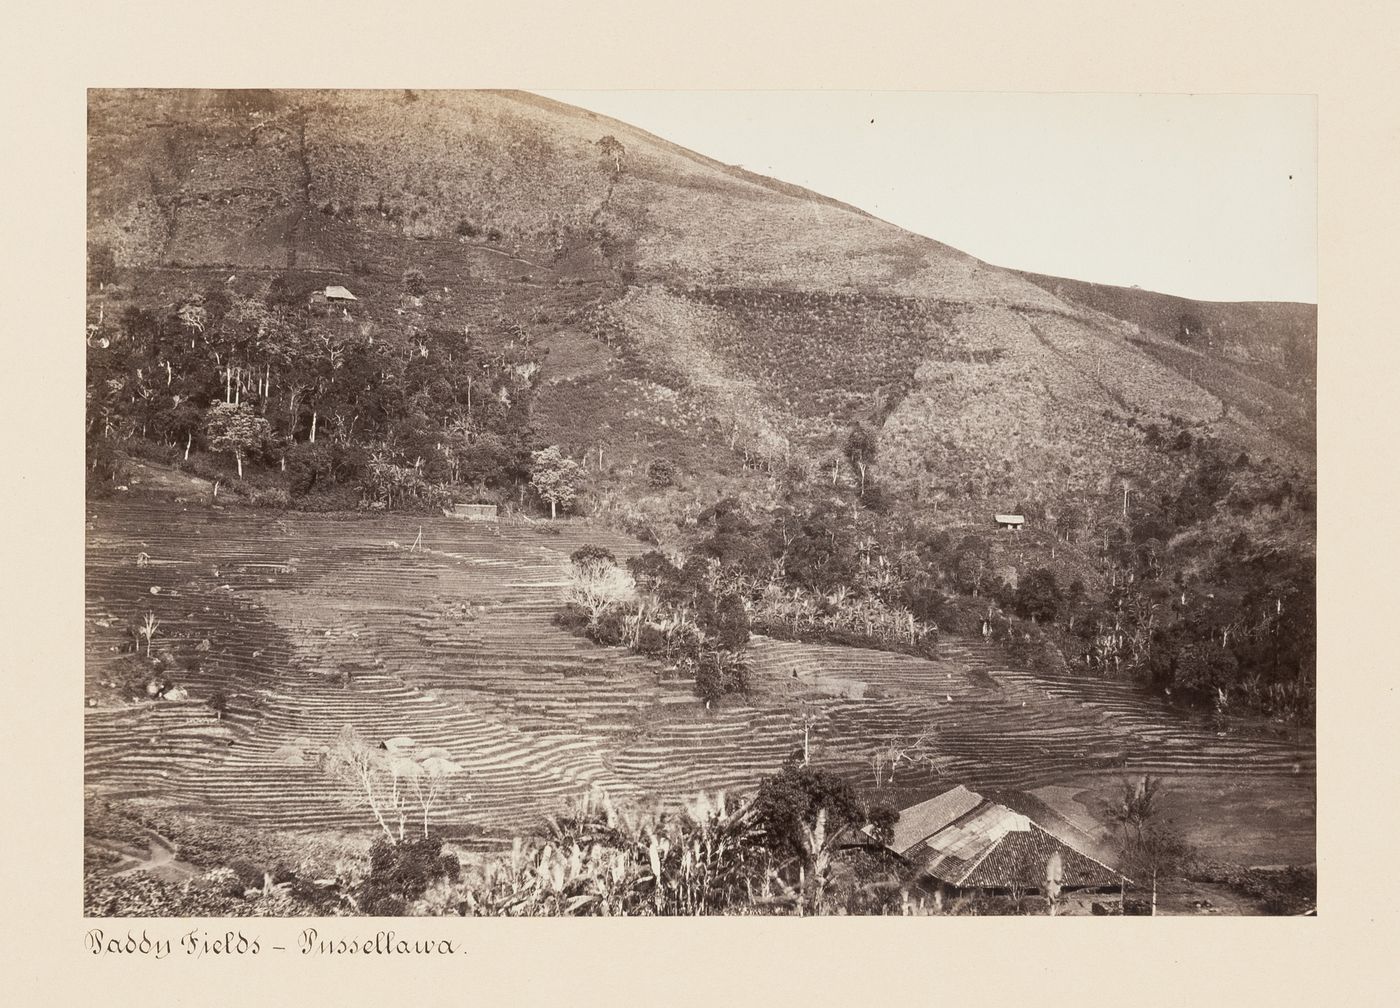 View of agricultural land and a mountain, Pussellawa, Ceylon (now Sri Lanka)